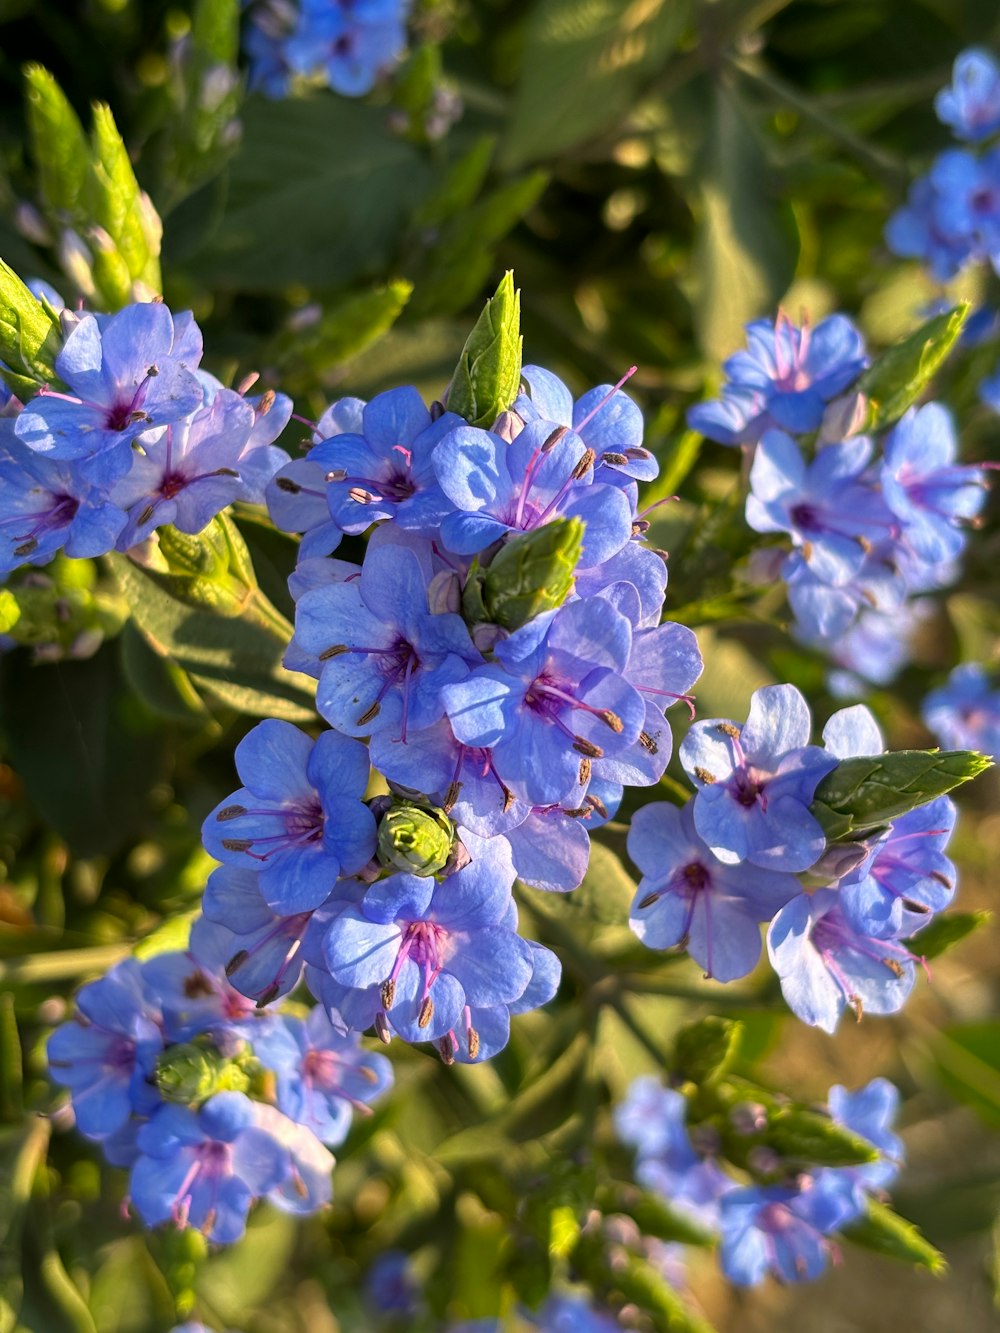 a bunch of blue flowers with green leaves